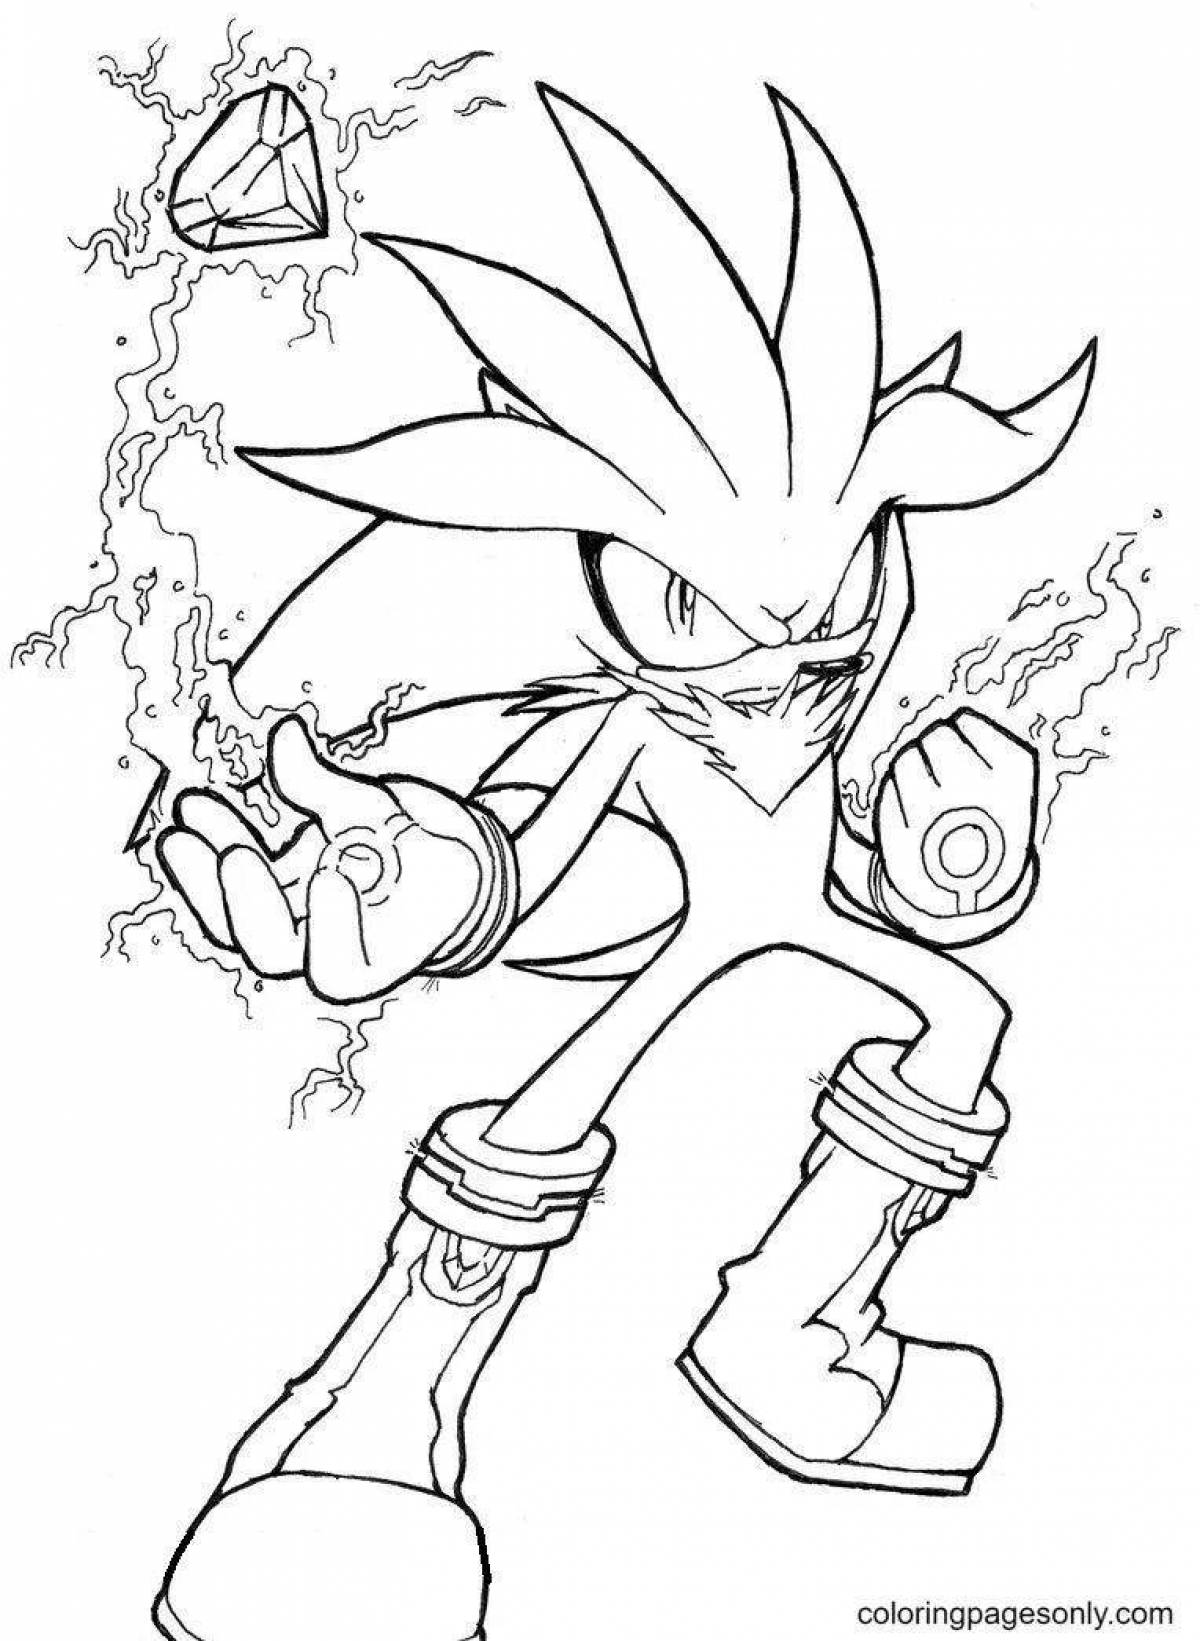 Dramatic sonic shredder coloring page